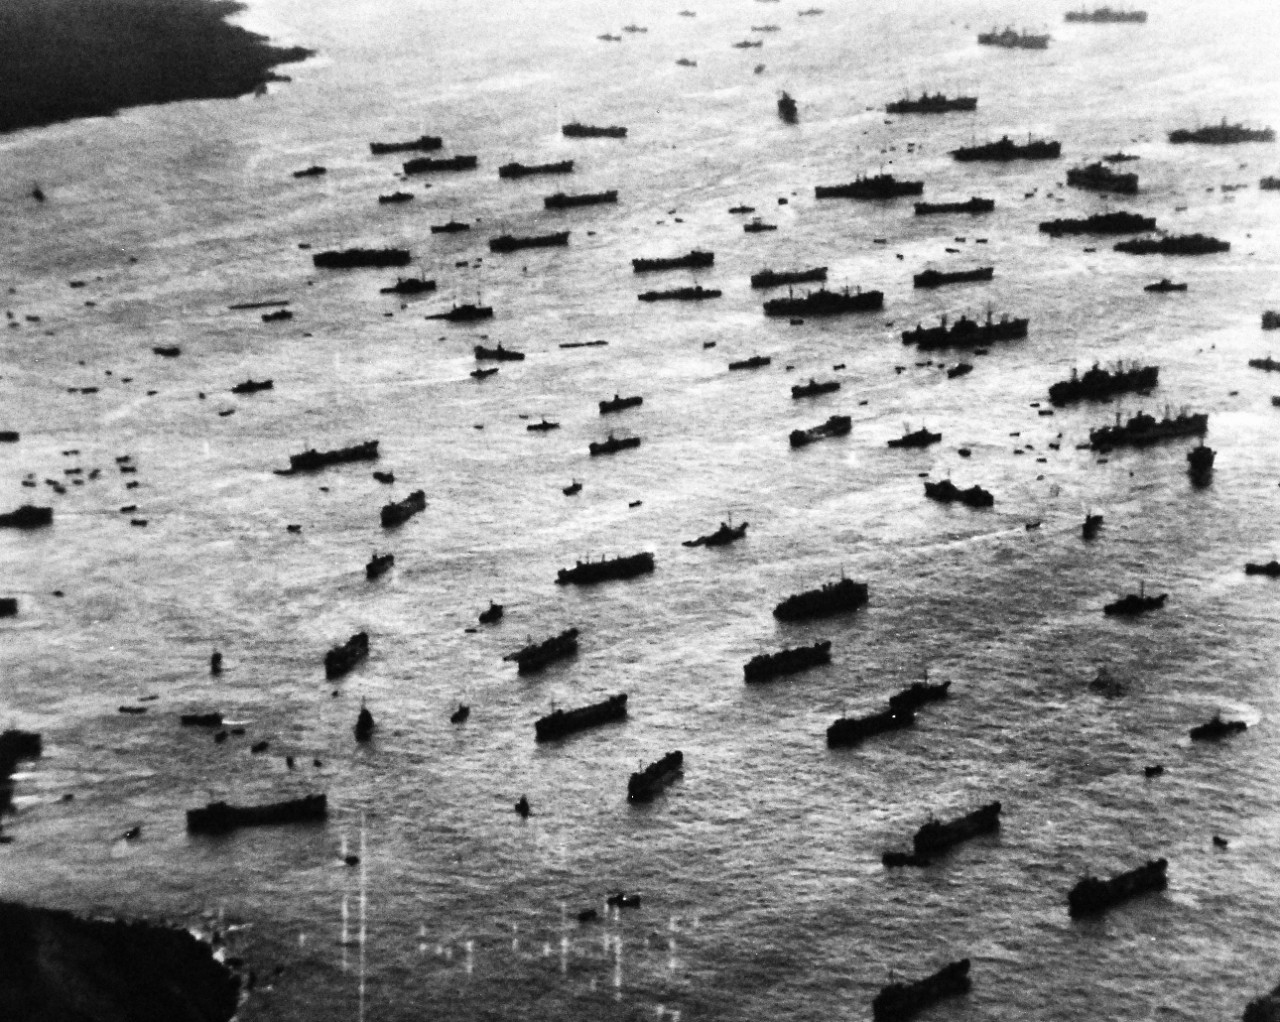 80-G-307206: Battle for Iwo Jima, February 1945.  U.S. Ships and landing craft anchored off East beach on Iwo Jima during landing operations.    Photographed by plane from USS Saginaw Bay (CVE-82), February 27, 1945.    U.S. Navy photograph, now in the collections of the National Archives.  (2016/09/06).